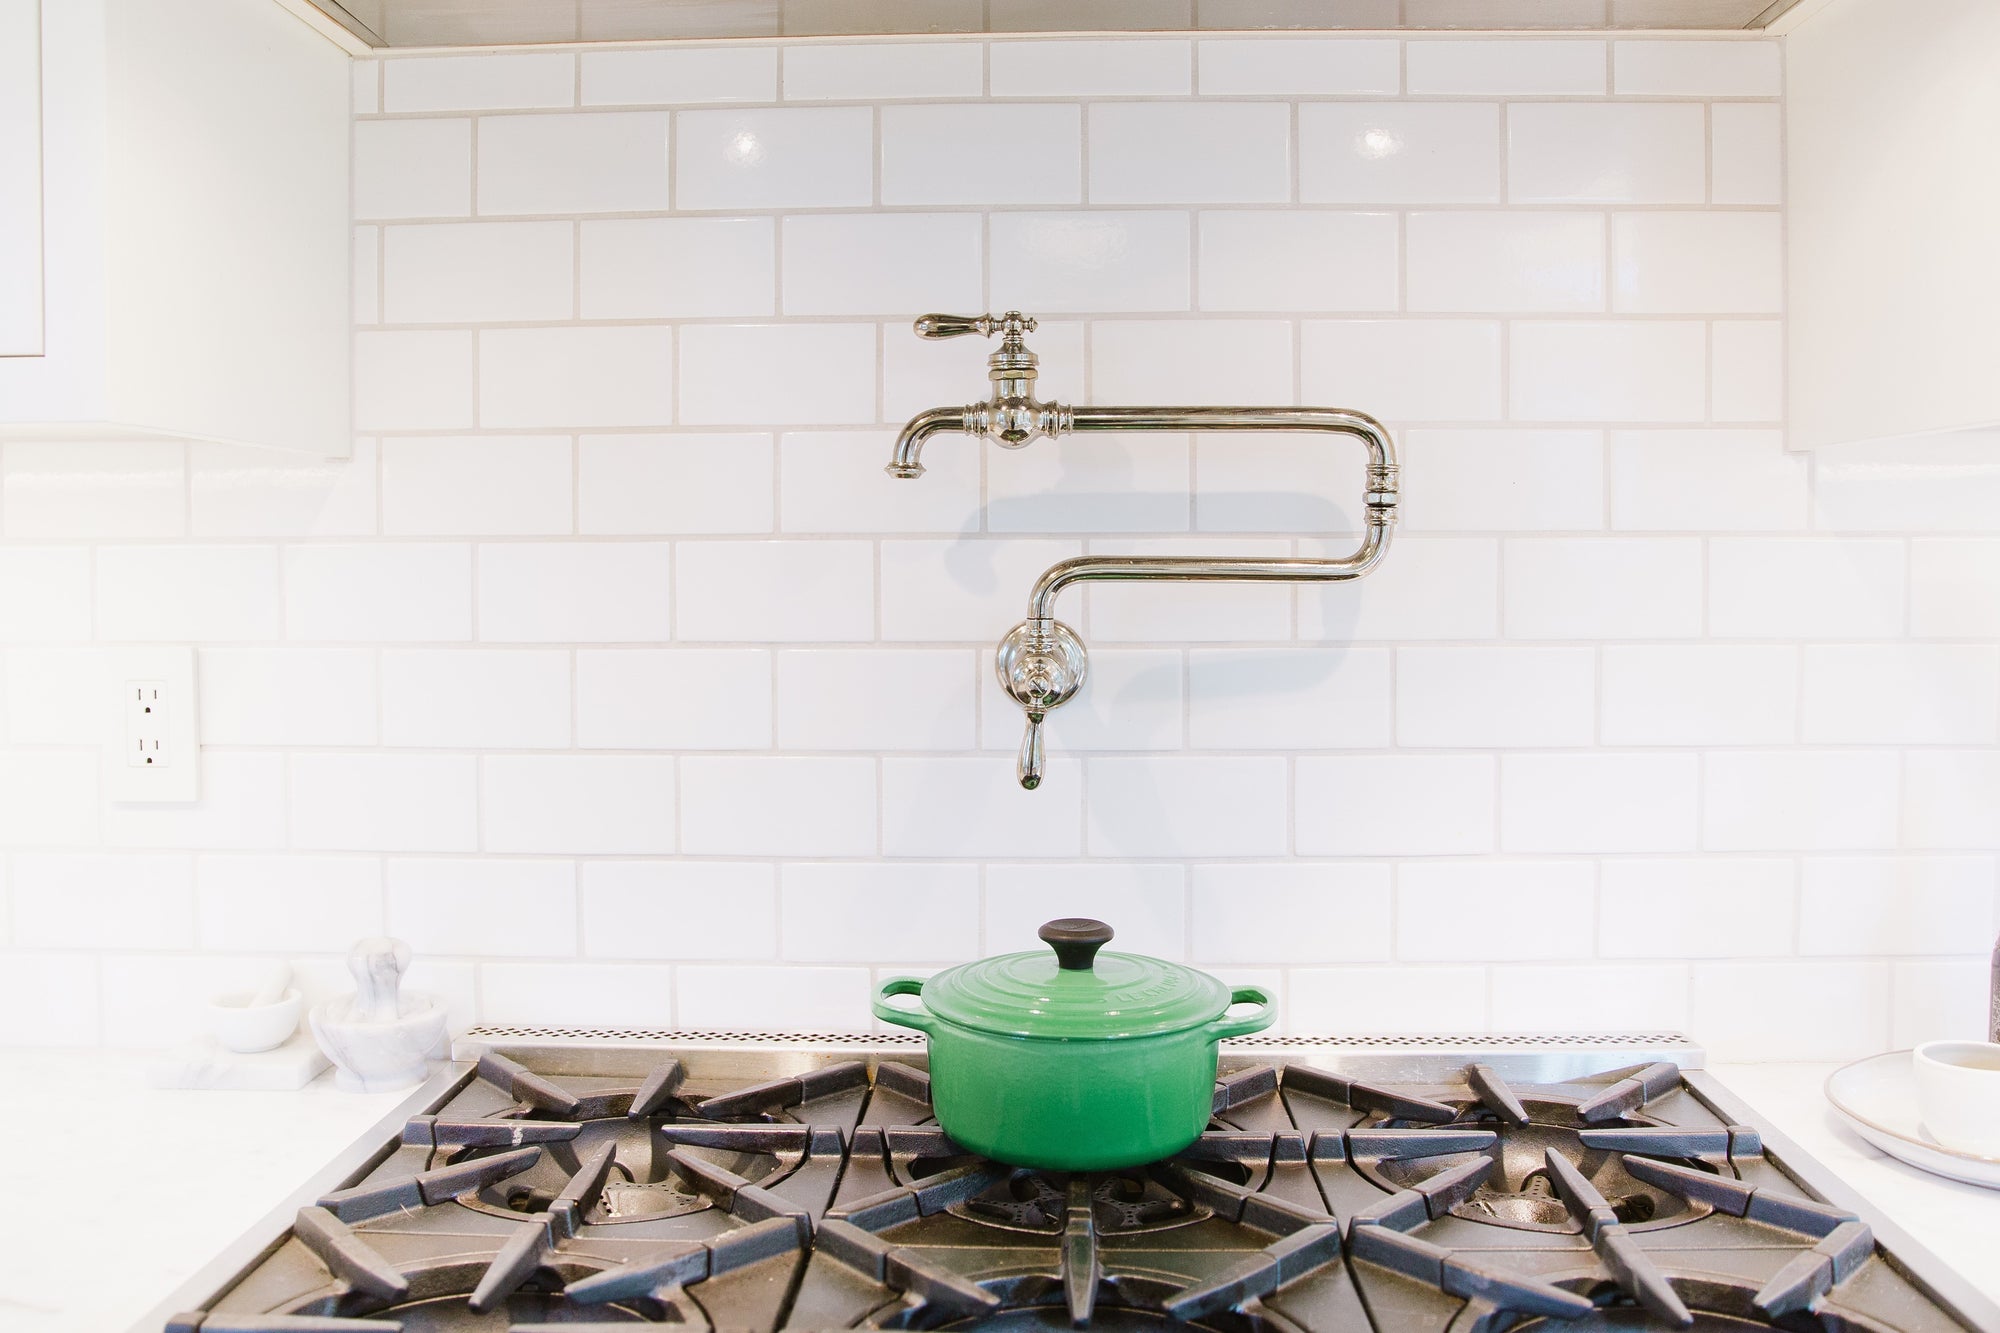 Pot filler over open range and green stock pot, with white subway tile